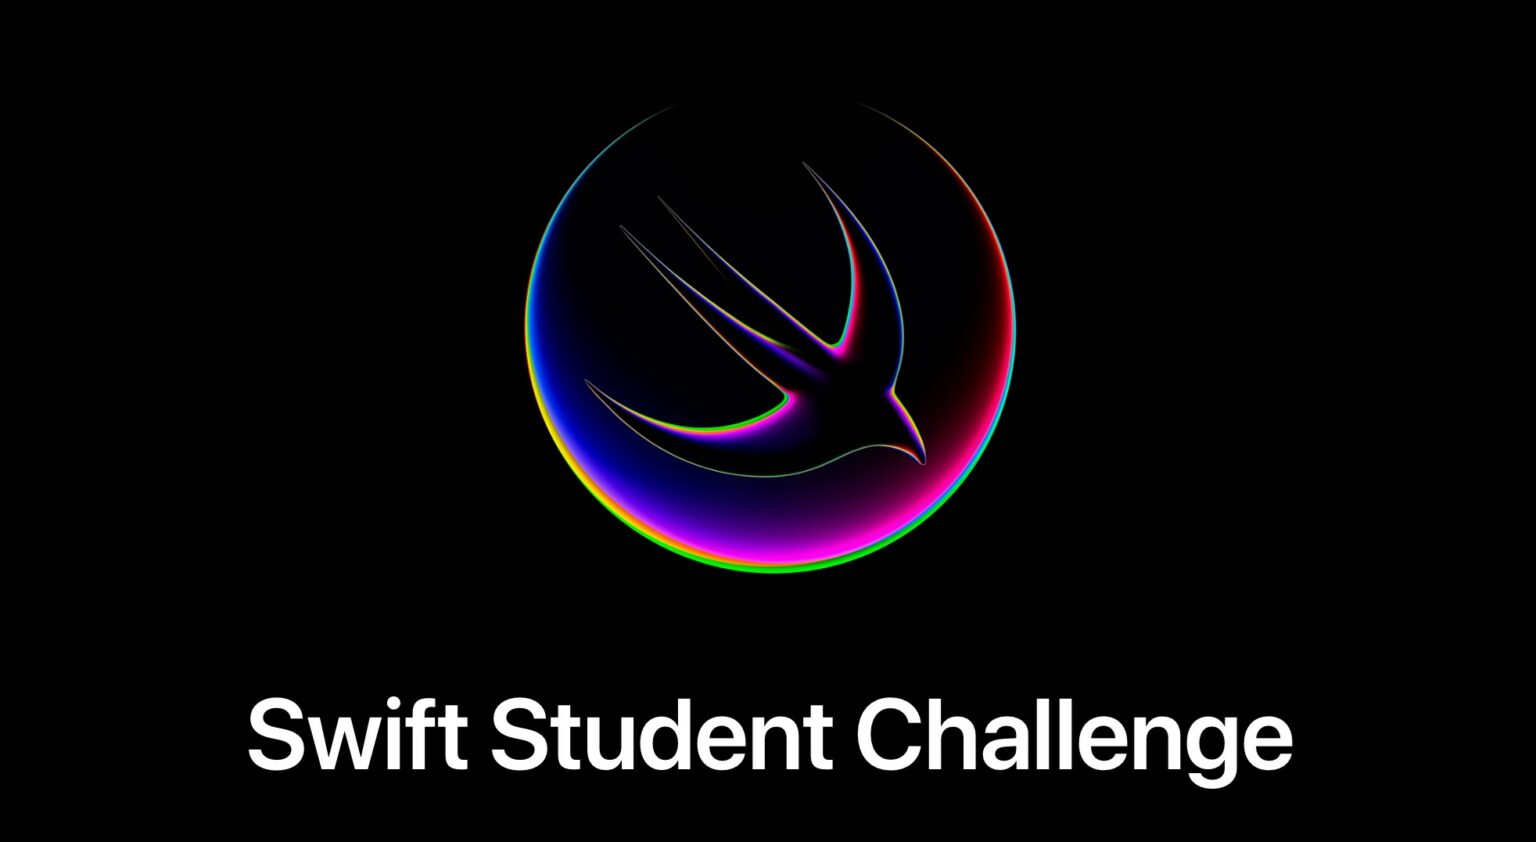 You can submit Swift Student Challenge coding projects through April 19.